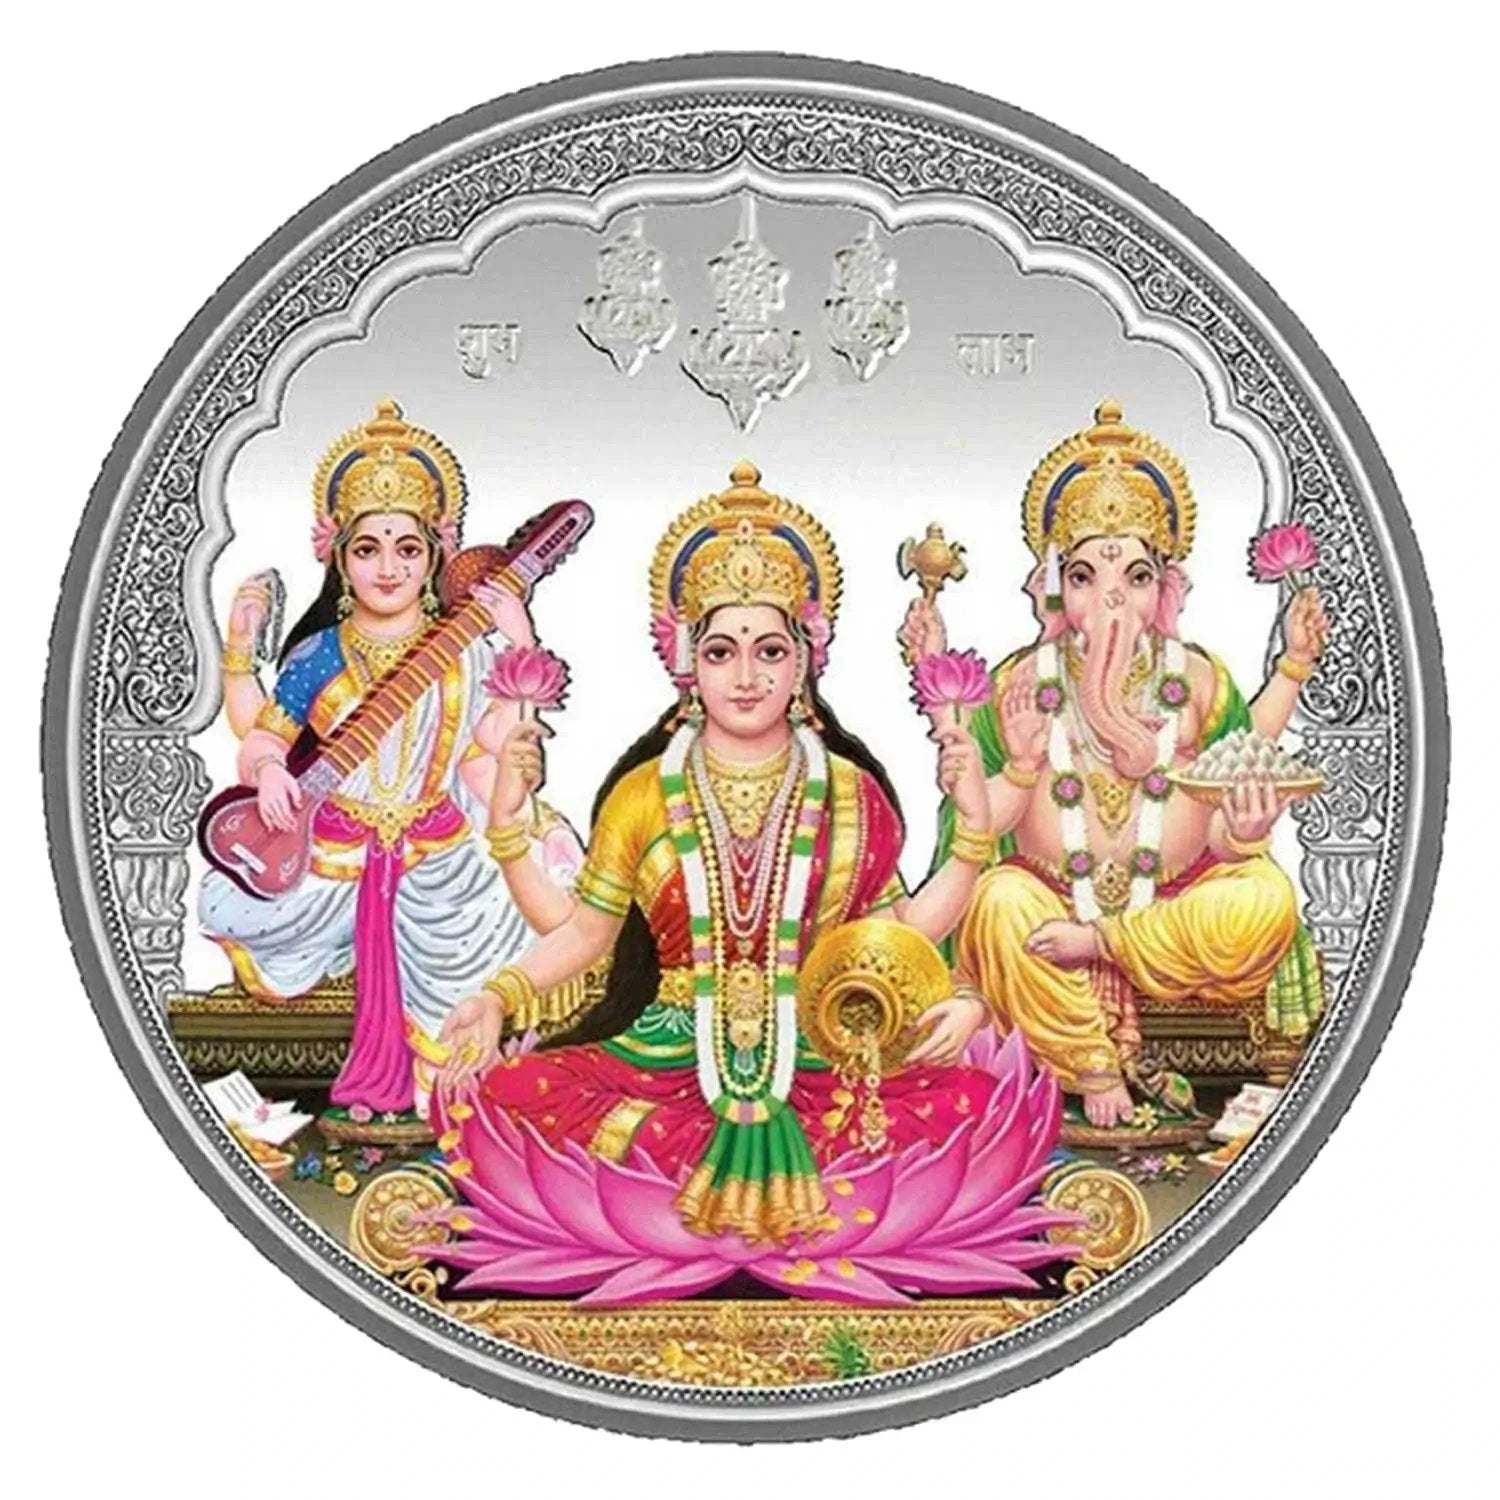 colour silver coins of Ganesh Laxmi in pure silver hallmark certified , buy online on www.caratcafe.in